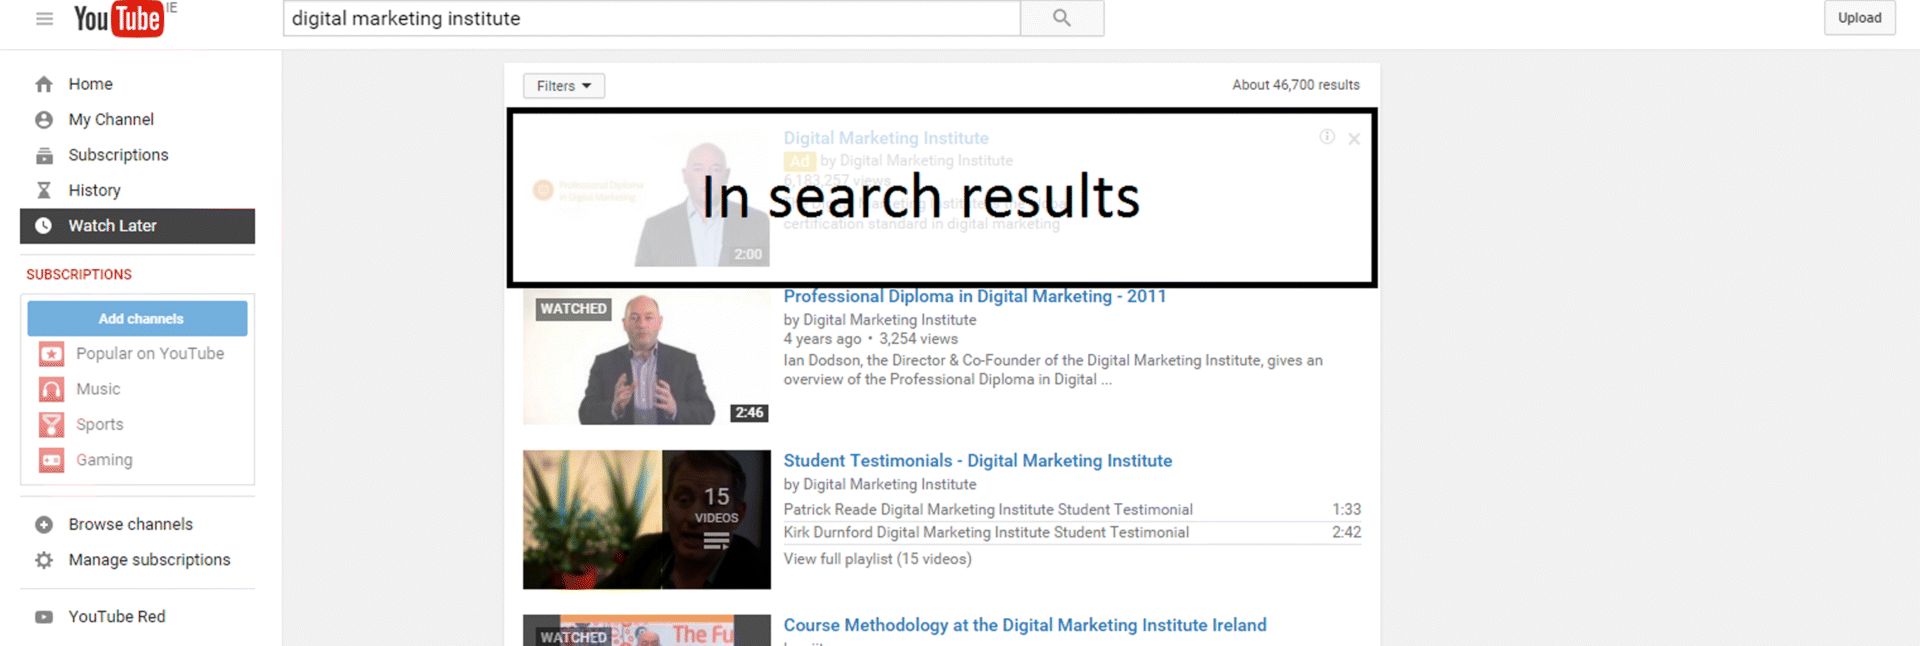 A screenshot depicting the highlighted videos in YouTube. The ads that appear first because an advertiser has paid for them to appear before organic search results